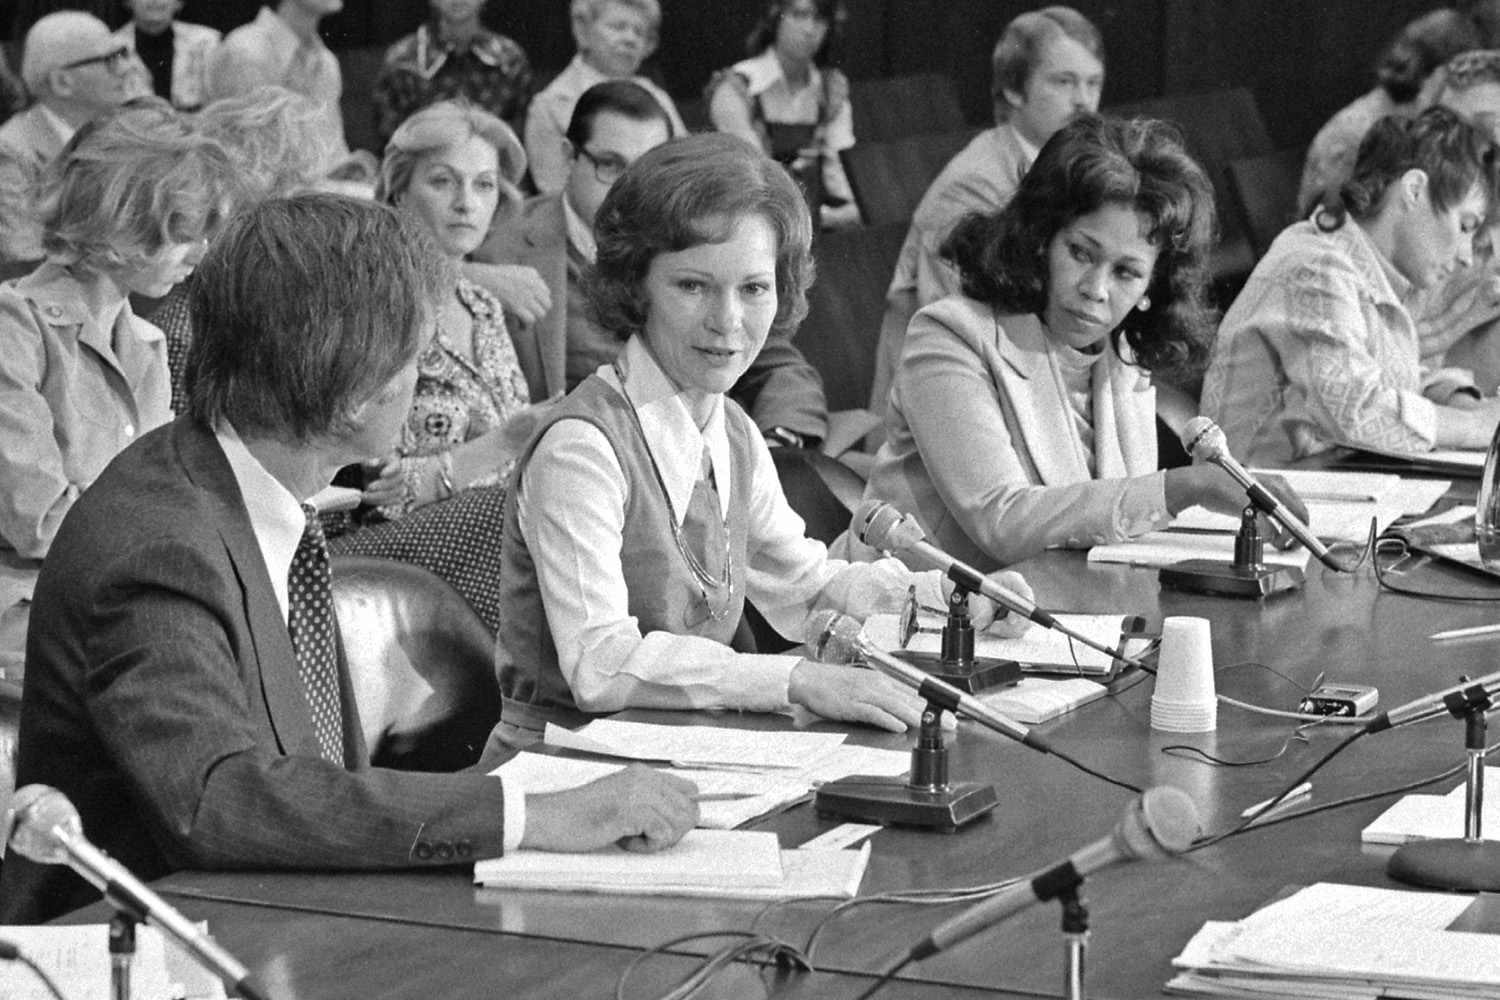 Rosalynn Carter chairs a meeting in Chicago, IL. for the President's Commission on Mental Health. circa 04/20/1977. (Photo by: HUM Images/Universal Images Group via Getty Images)